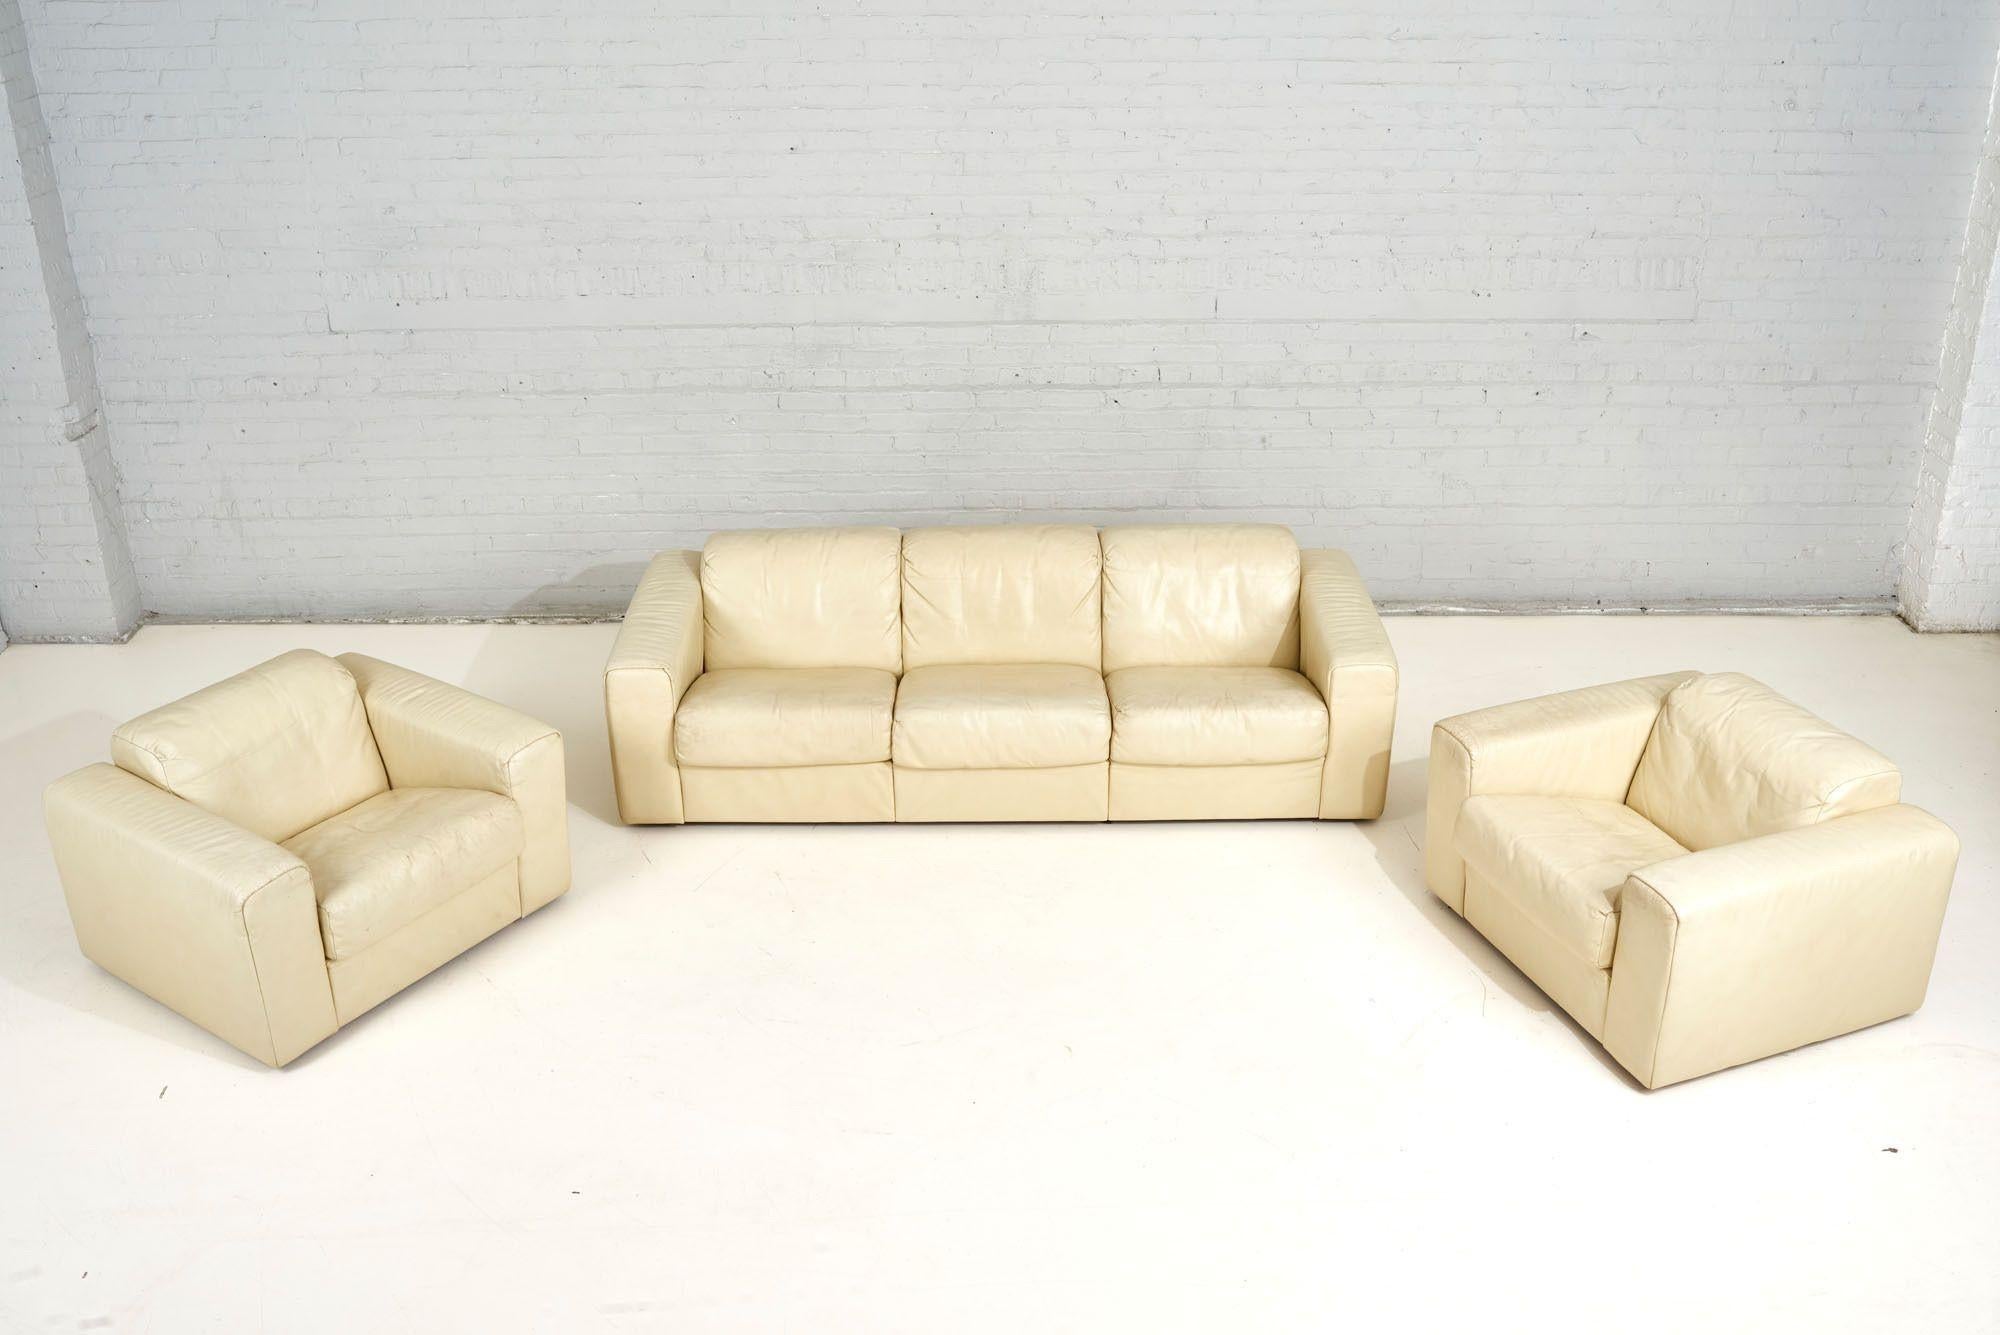 Baron Sofa by Robert Haussmann for Stendig, Cream Leather, 1970 For Sale 12